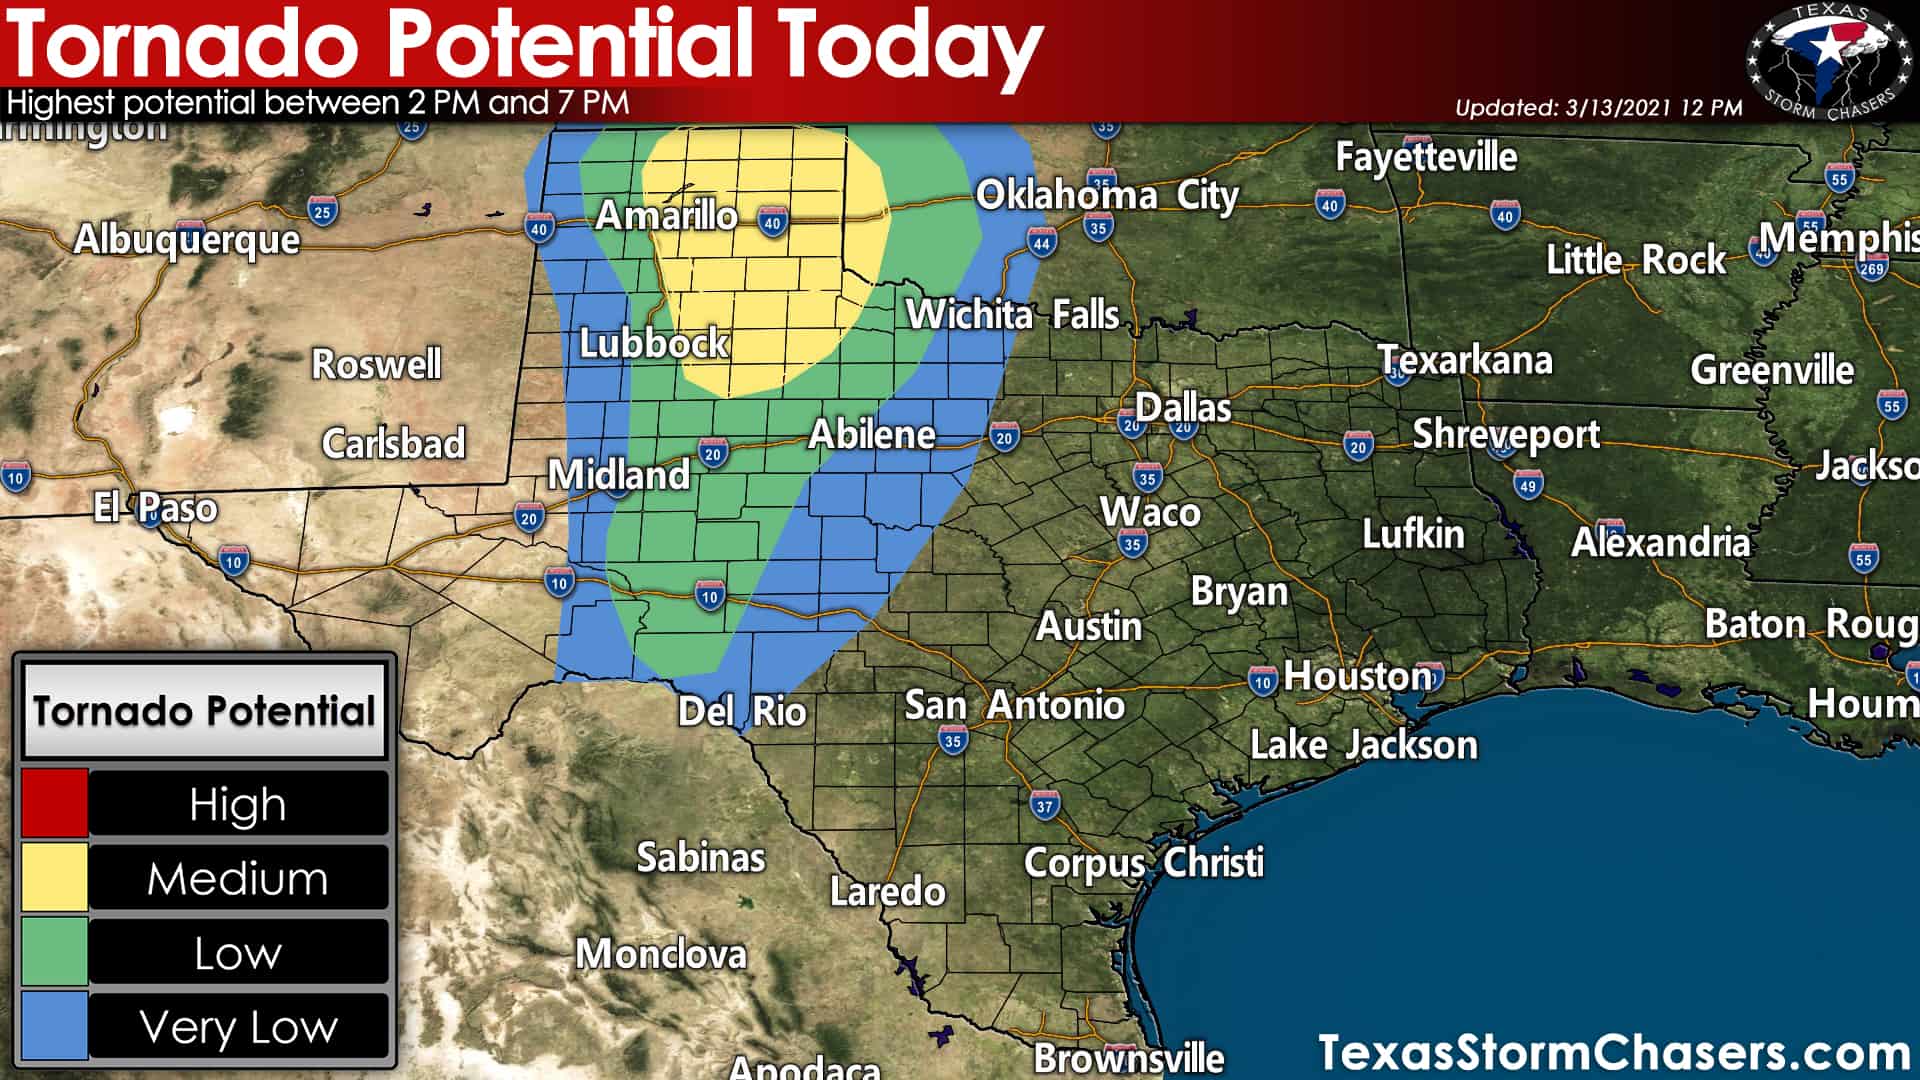 Significant Severe Weather Outbreak Likely Today In West Texas And Texas Panhandle Laptrinhx News 5957